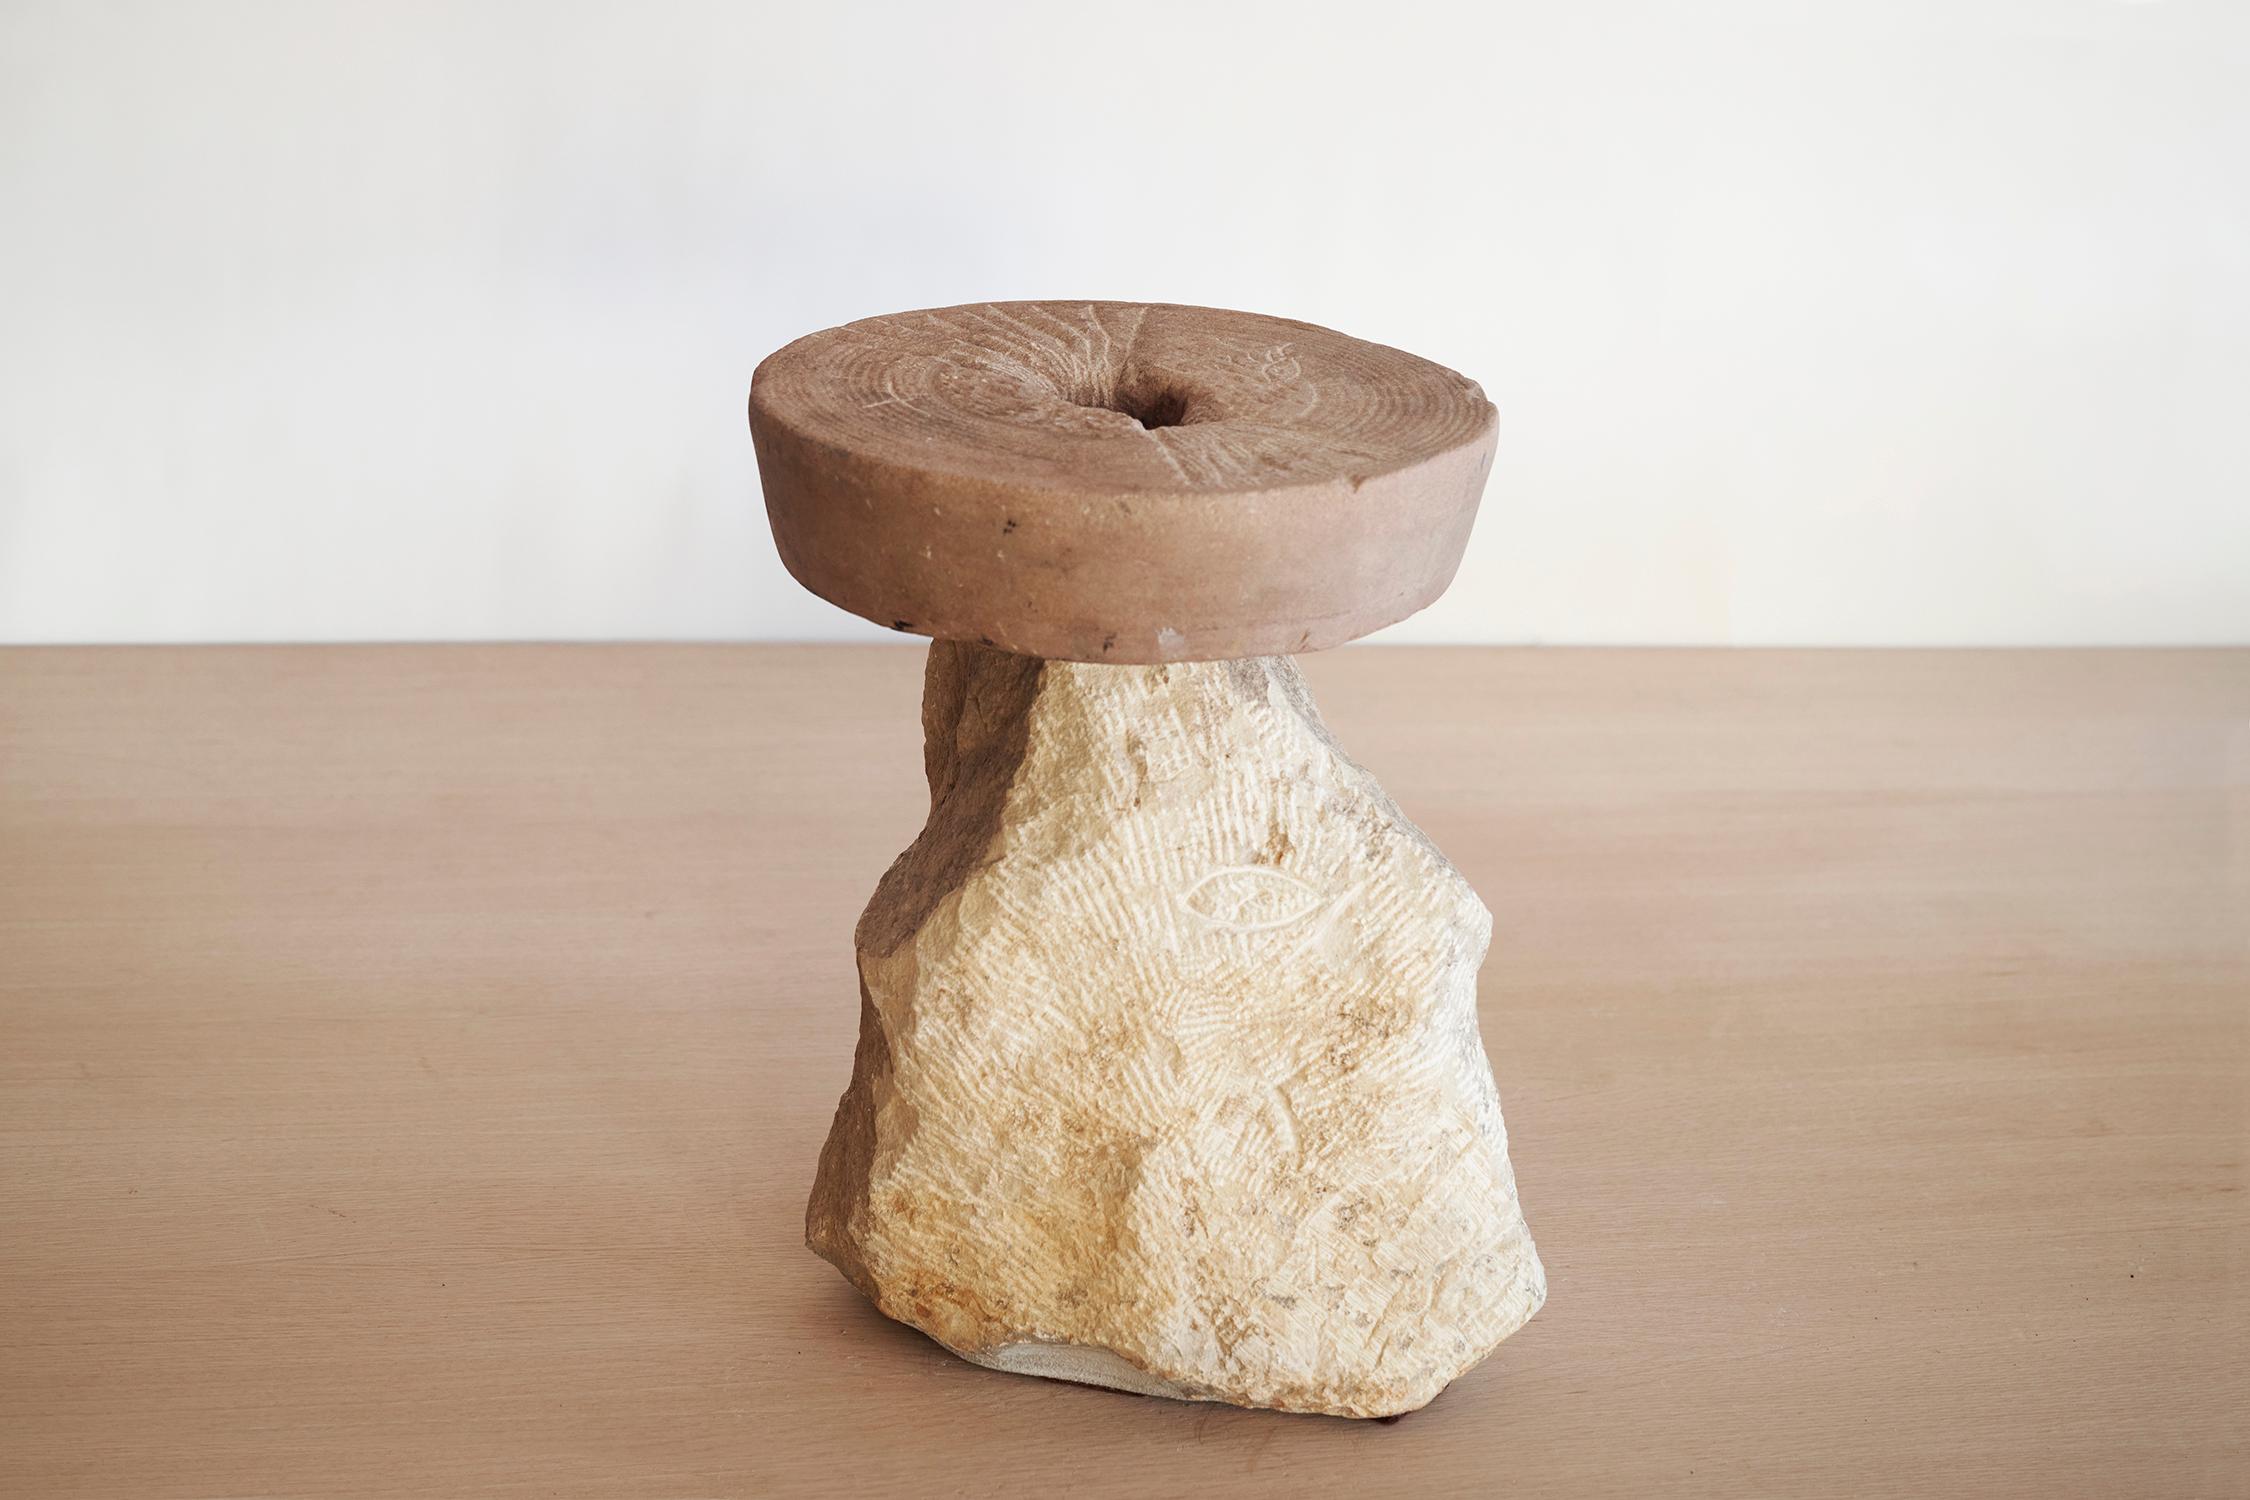 Unique Sin Nombre stone sculpture by Jean-Baptiste Van den Heede
Unique piece
Dimensions: D 30 x W 30 x H 40 cm
Materials: stone.

Jean-Baptiste Van den Heede defines himself as a cabinetmaker-designer and an artist of academic training and family